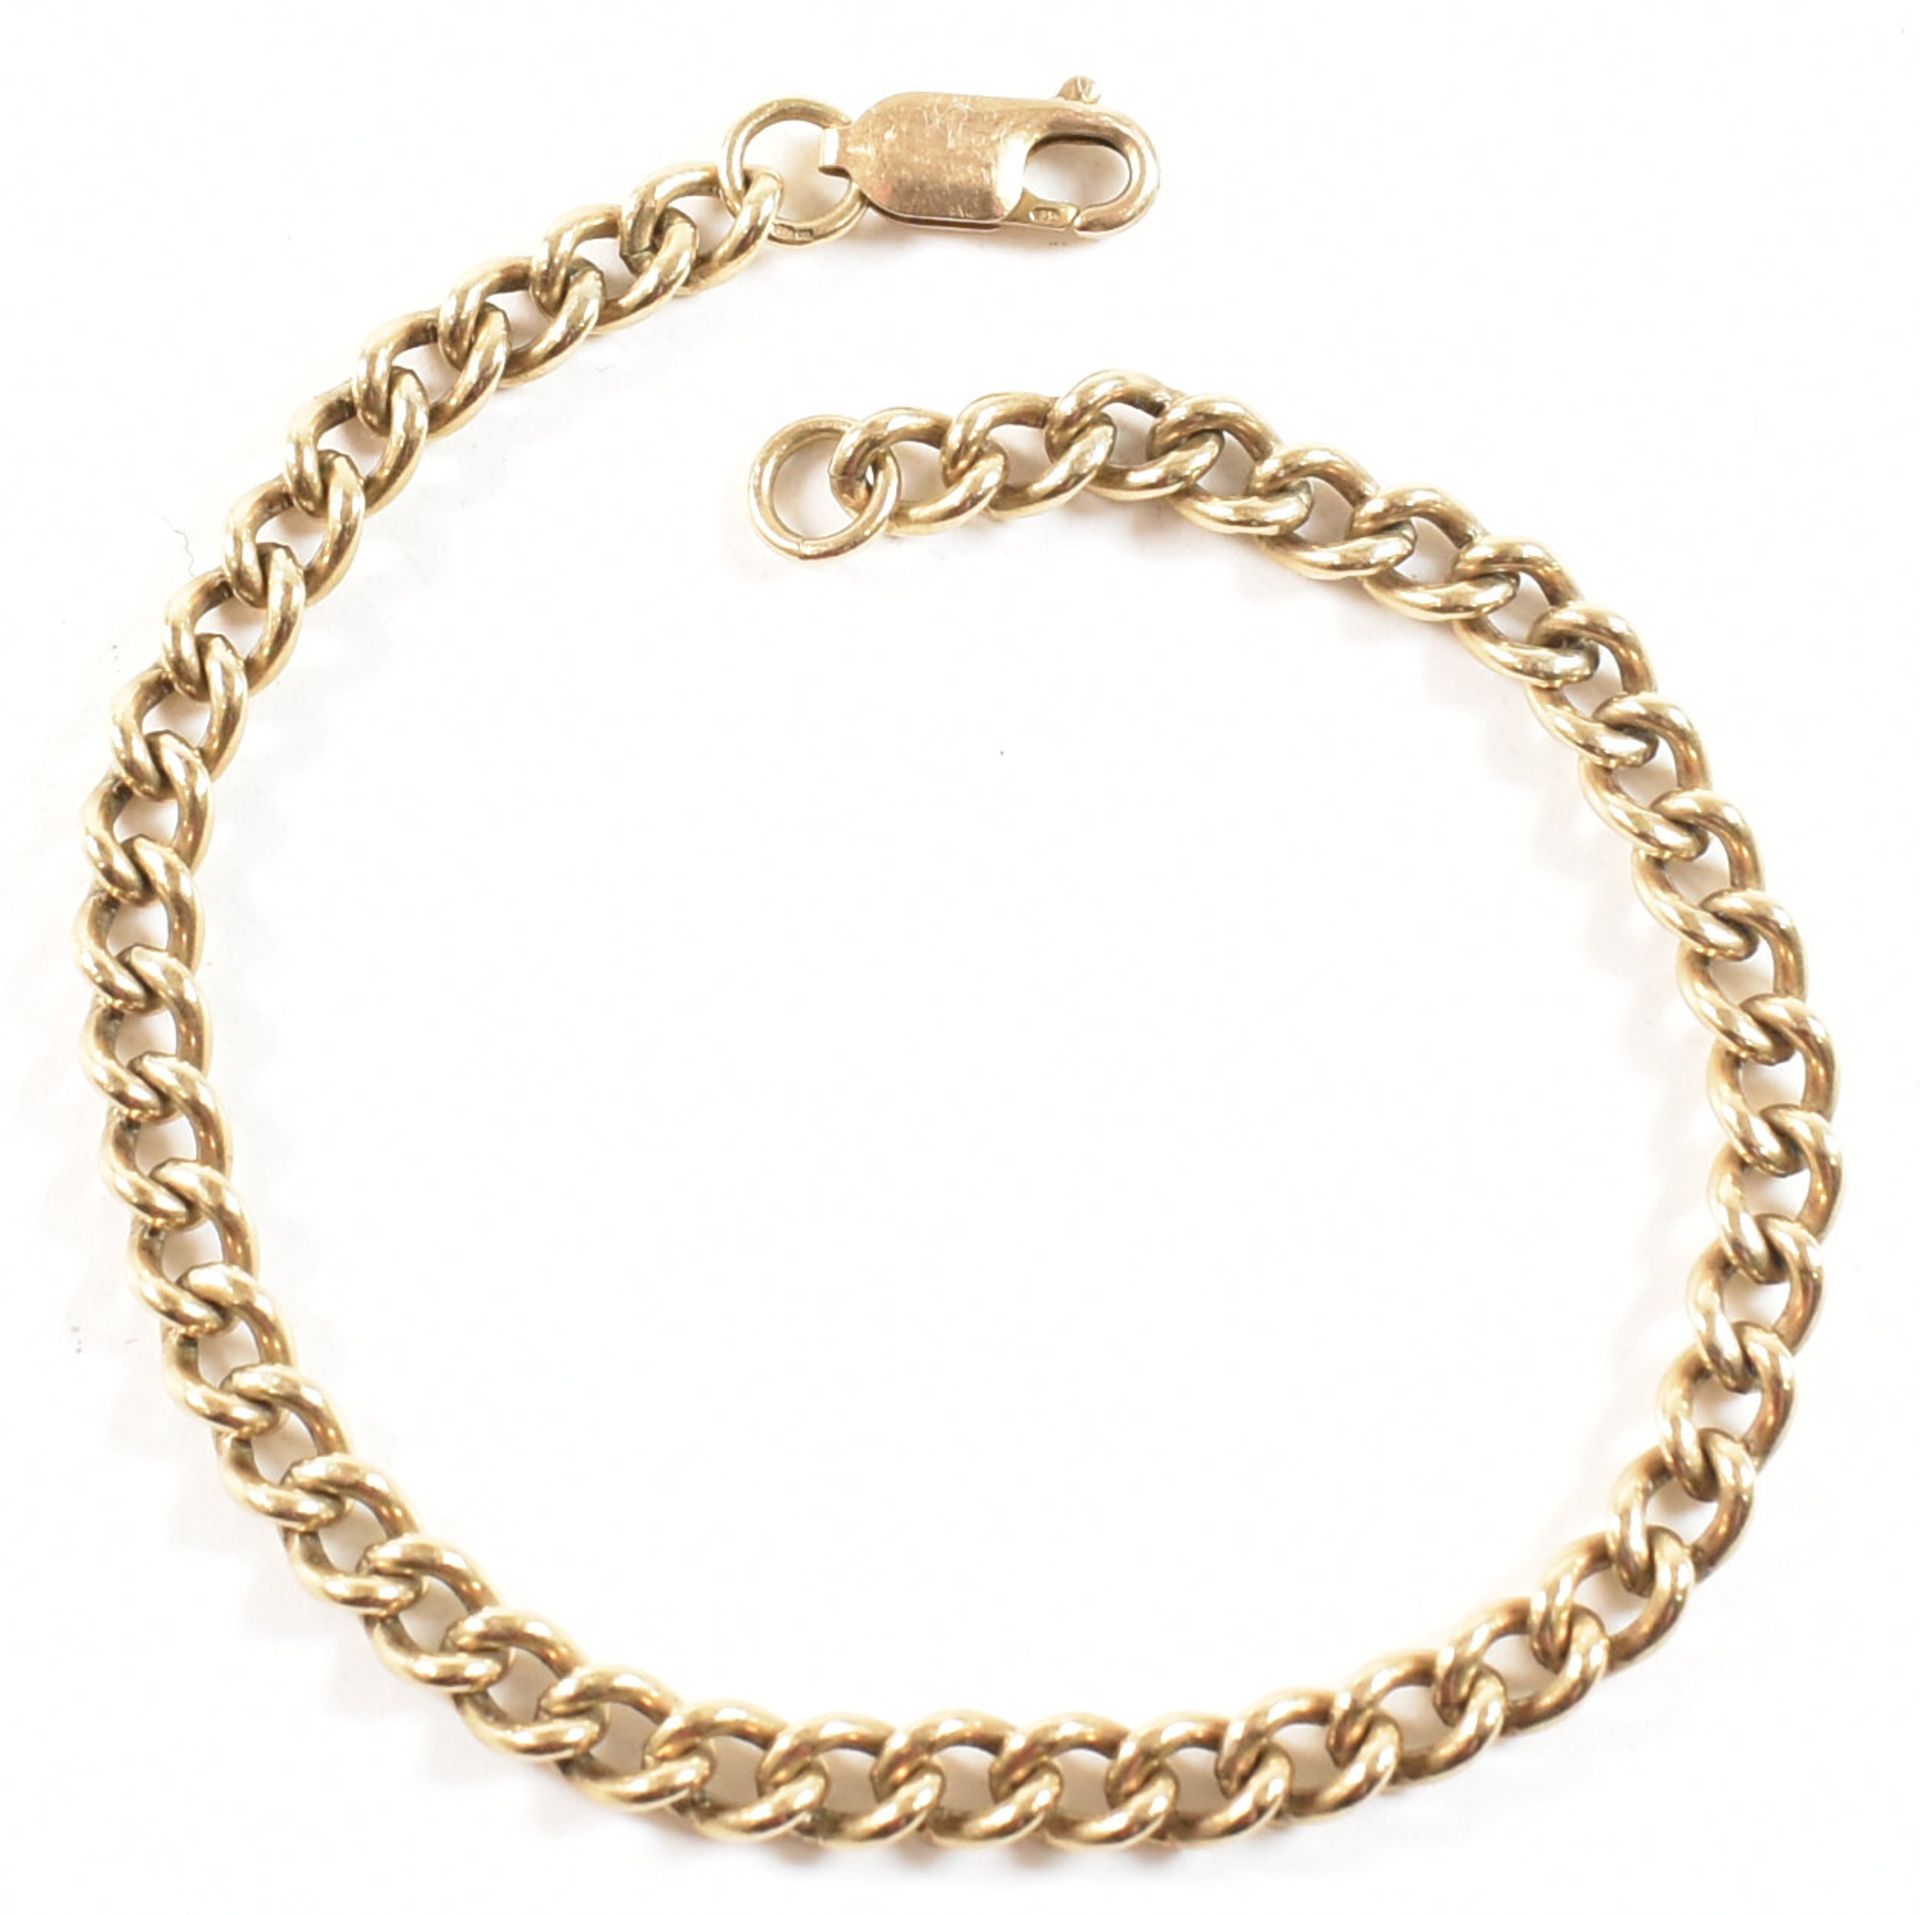 HALLMARKED 9CT GOLD CURB LINK CHAIN BRACELET - Image 2 of 4